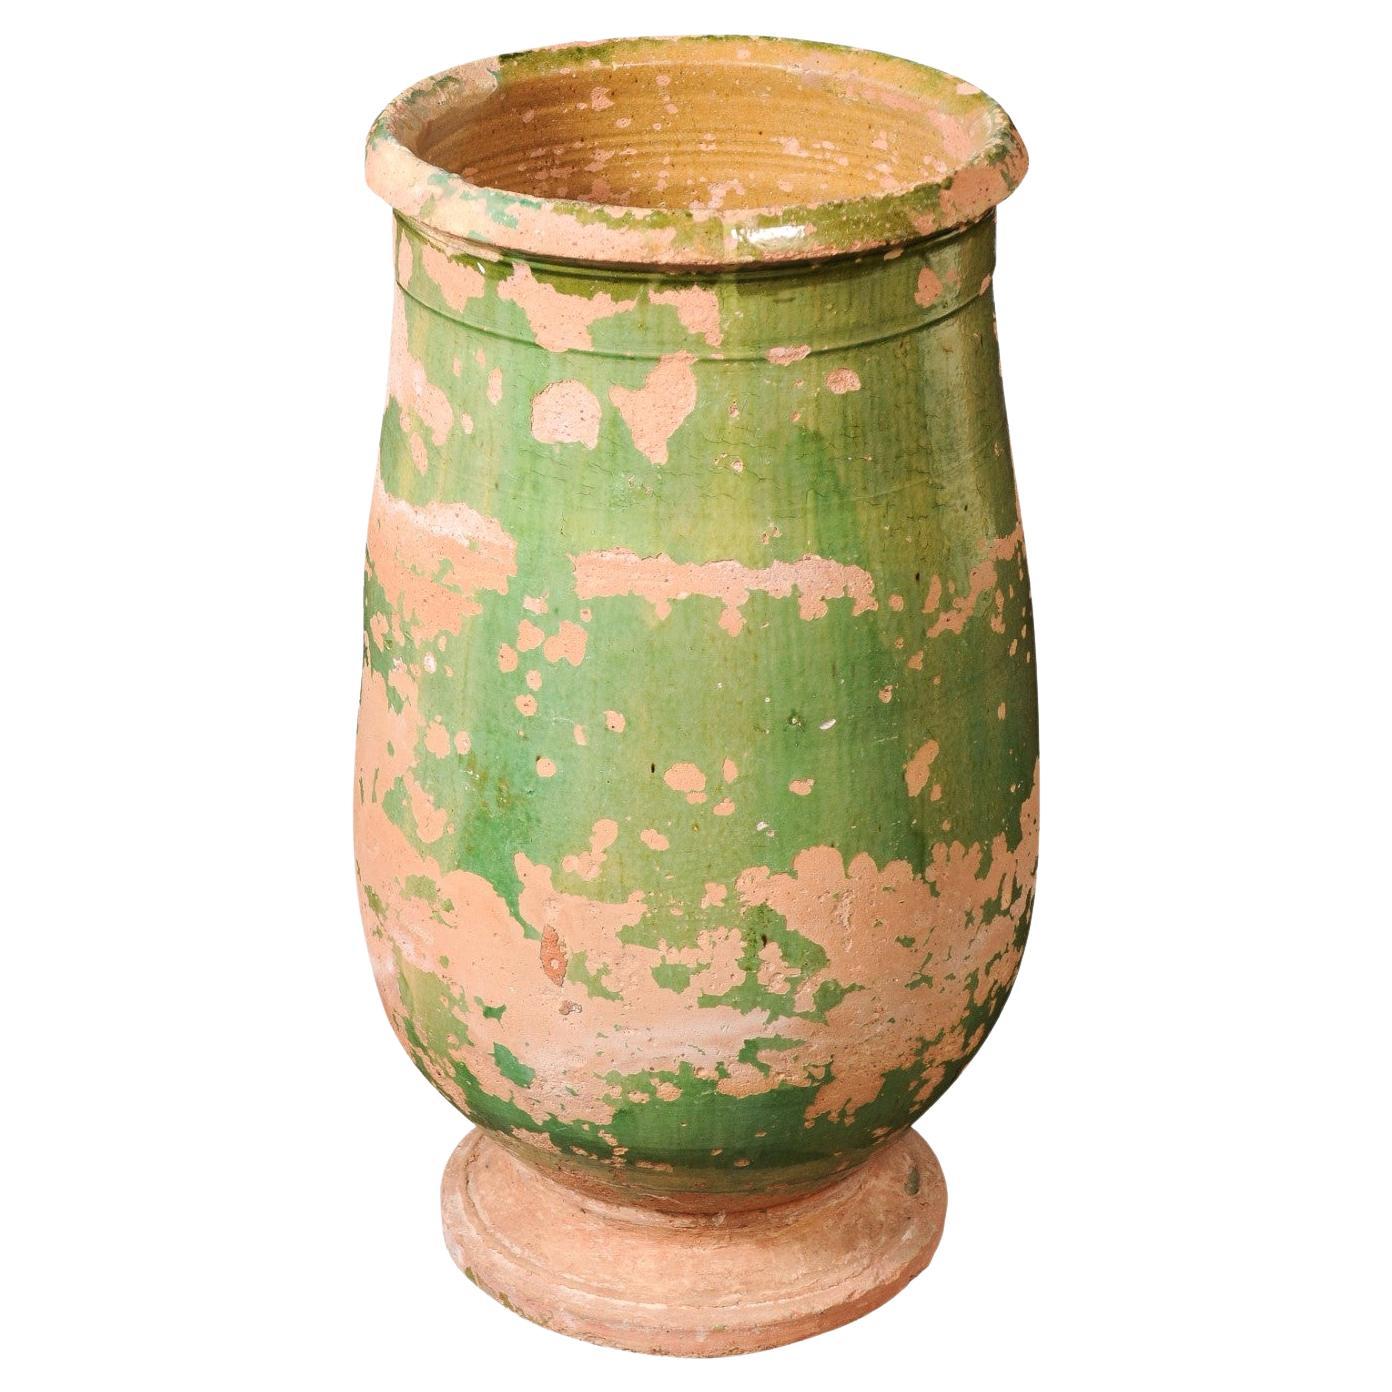 French Provincial 1880s Green Glazed Oblong Terracotta Jar with Weathered Patina